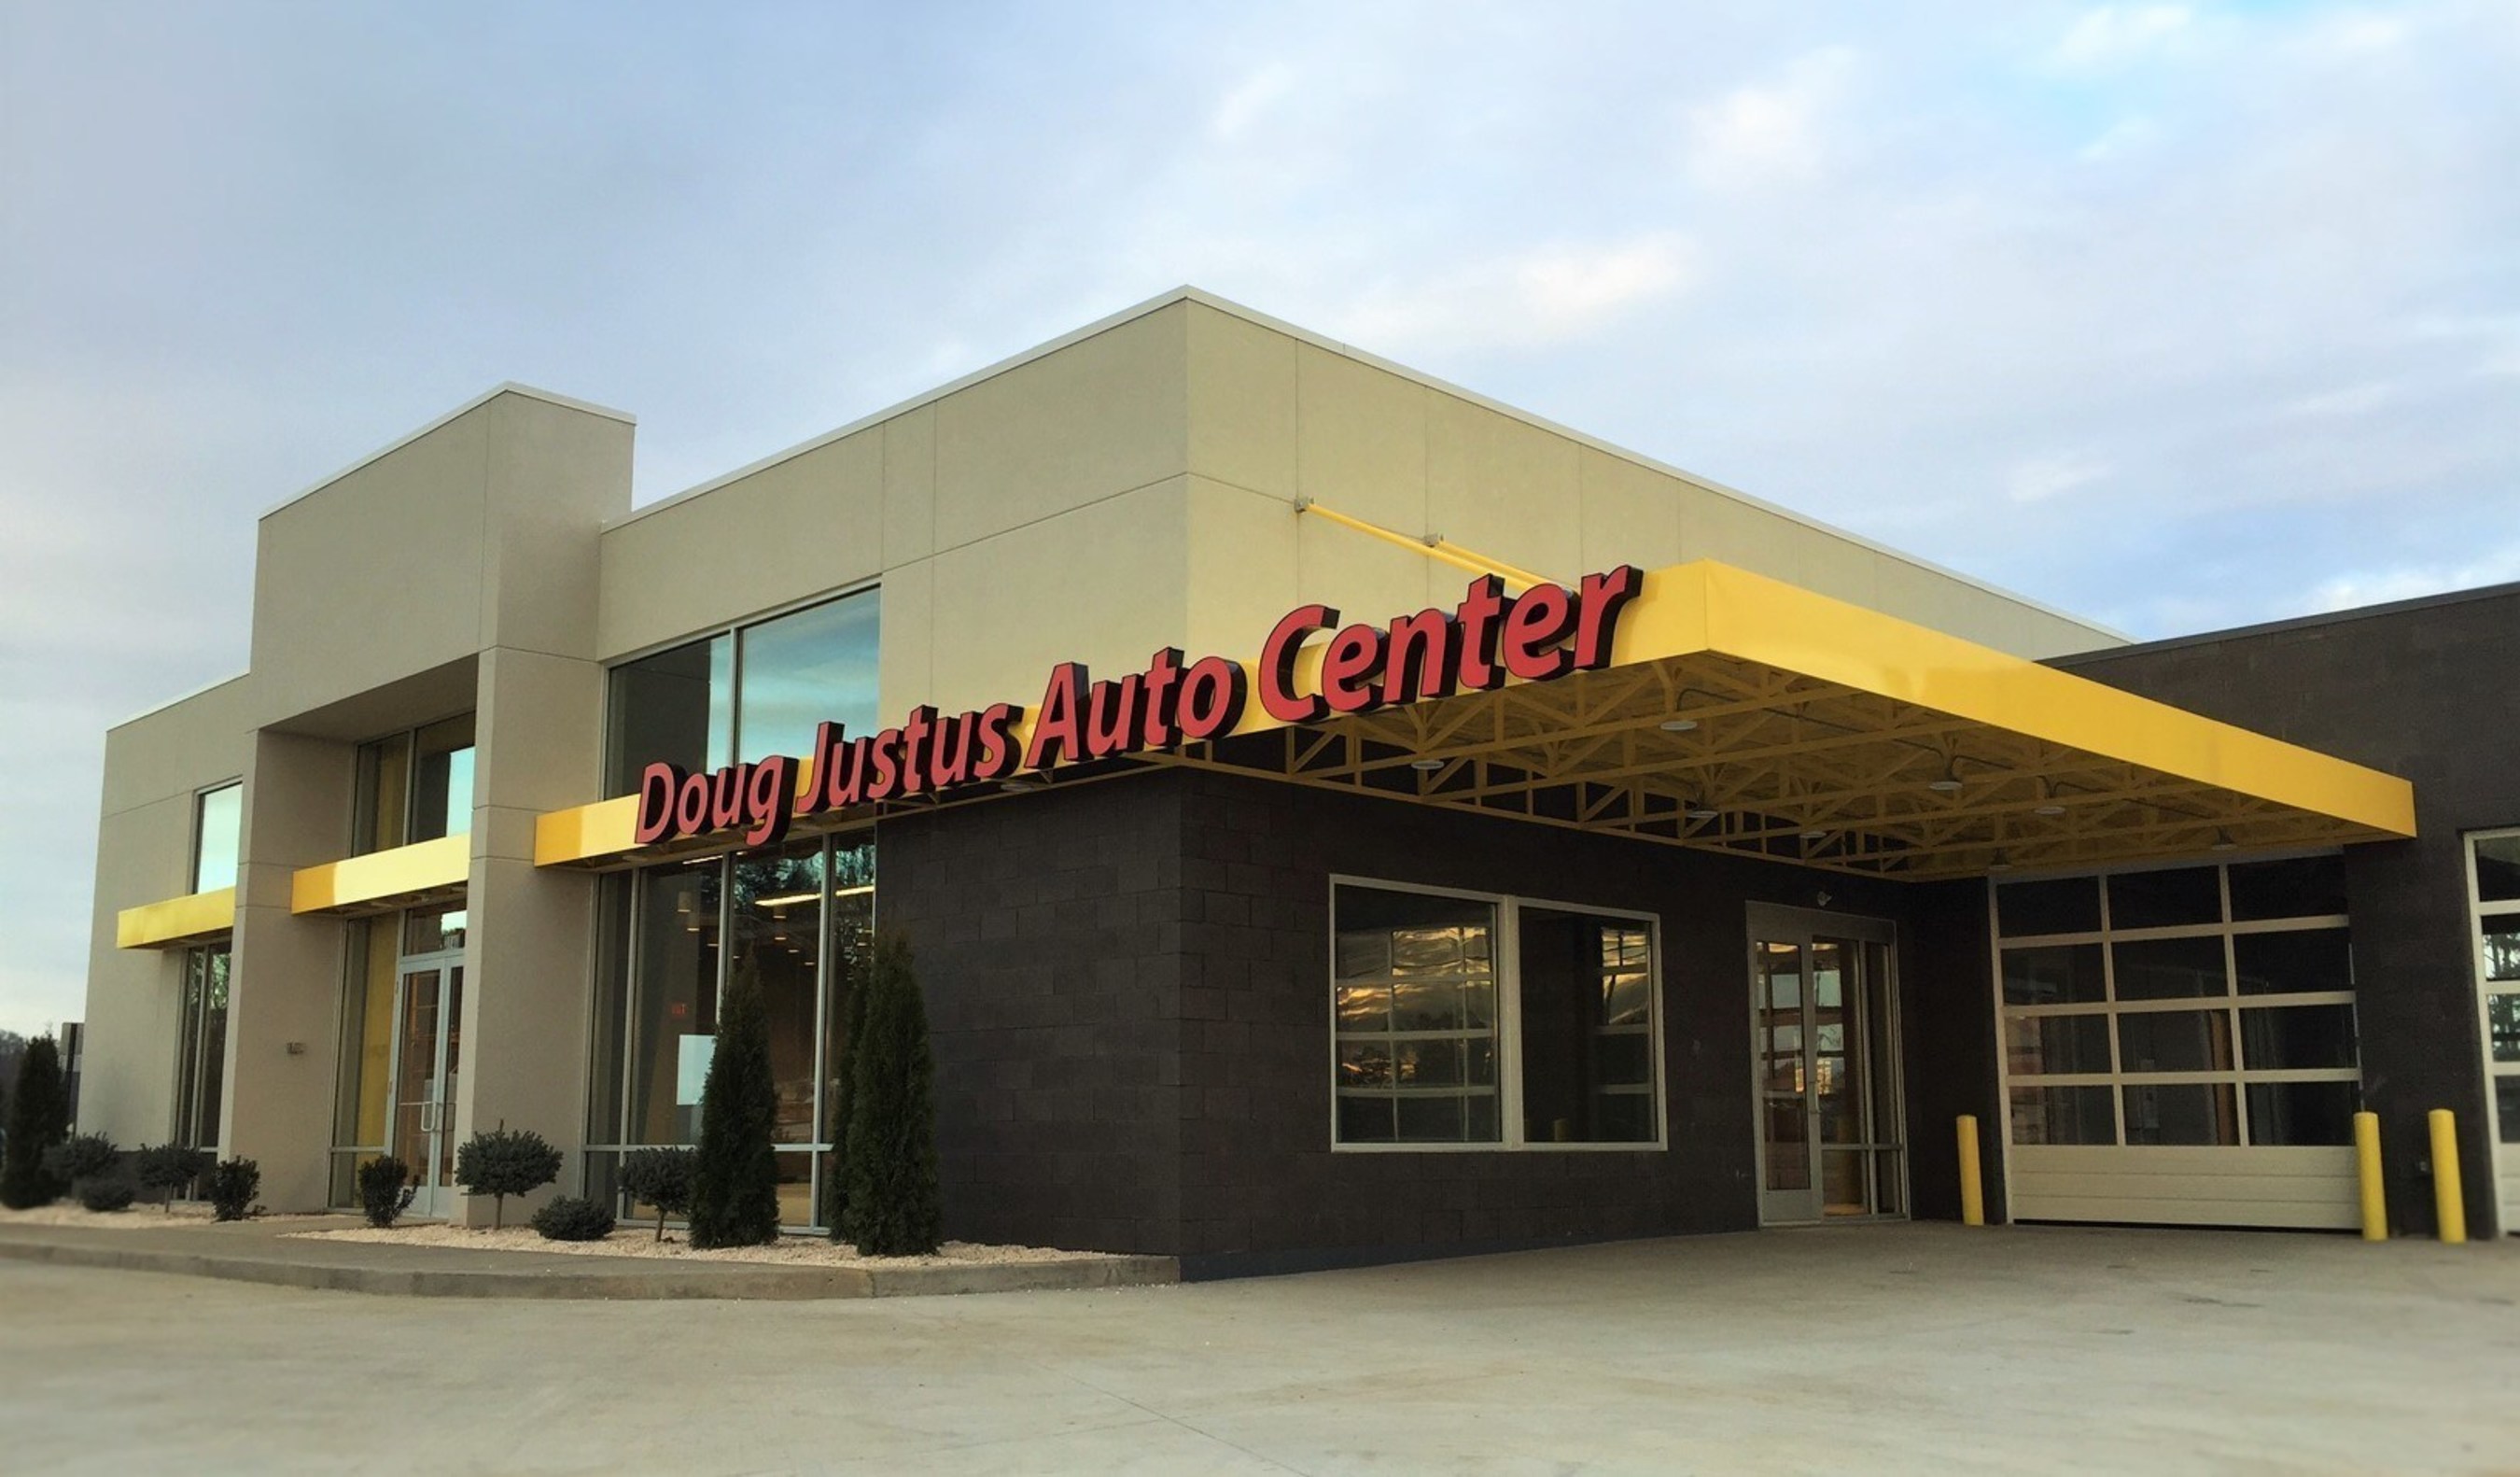 The all-new 4,680 sq. ft. Doug Justus Auto Center differentiates itself from traditional pre-owned automotive dealers by providing a contemporary interior and exterior design similar to the approach that many new, modern auto dealerships have embraced.